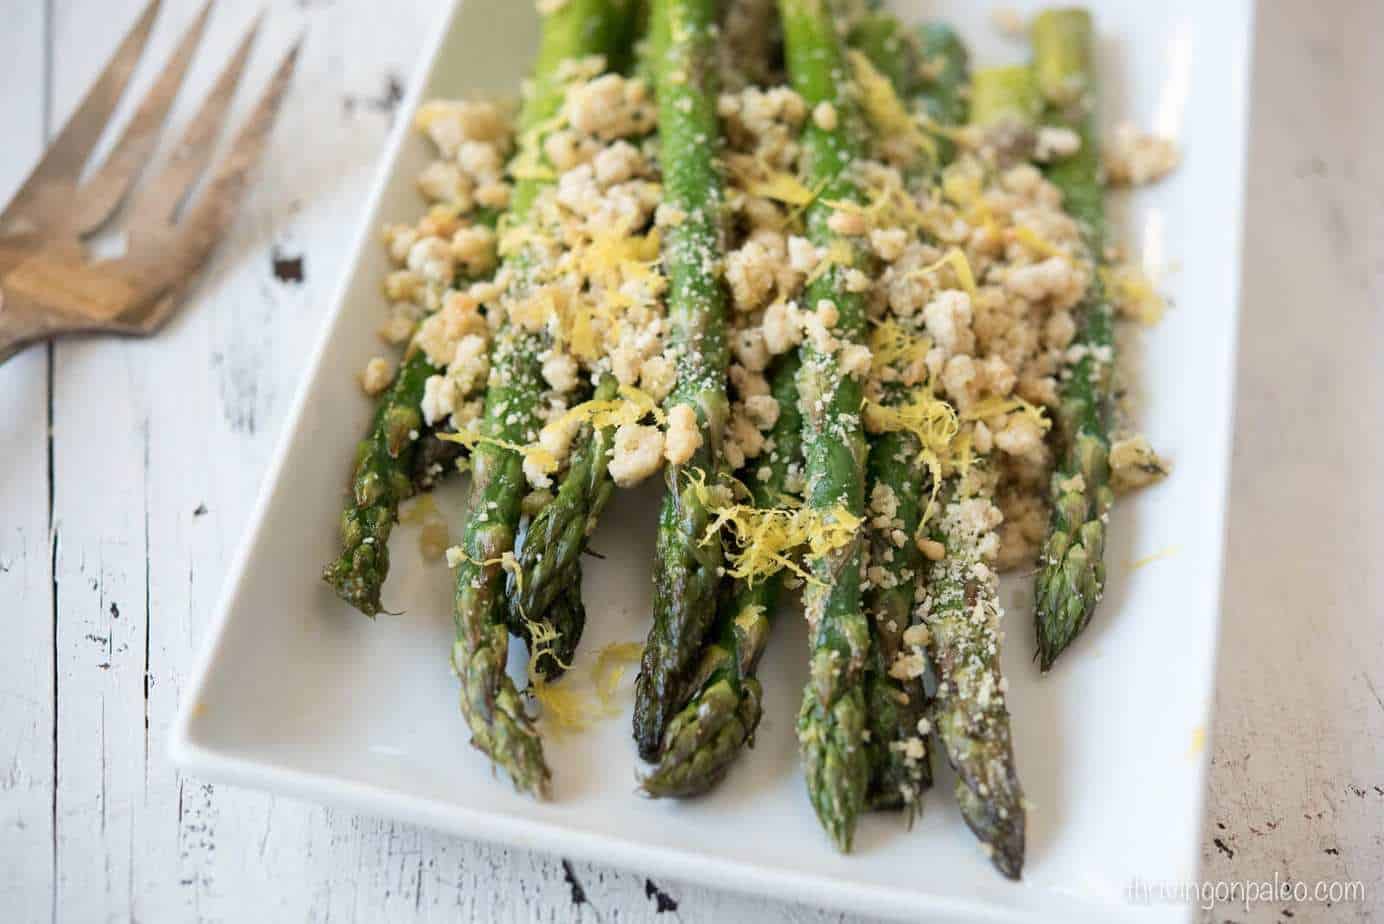 Roasted Asparagus with Paleo Breadcrumbs